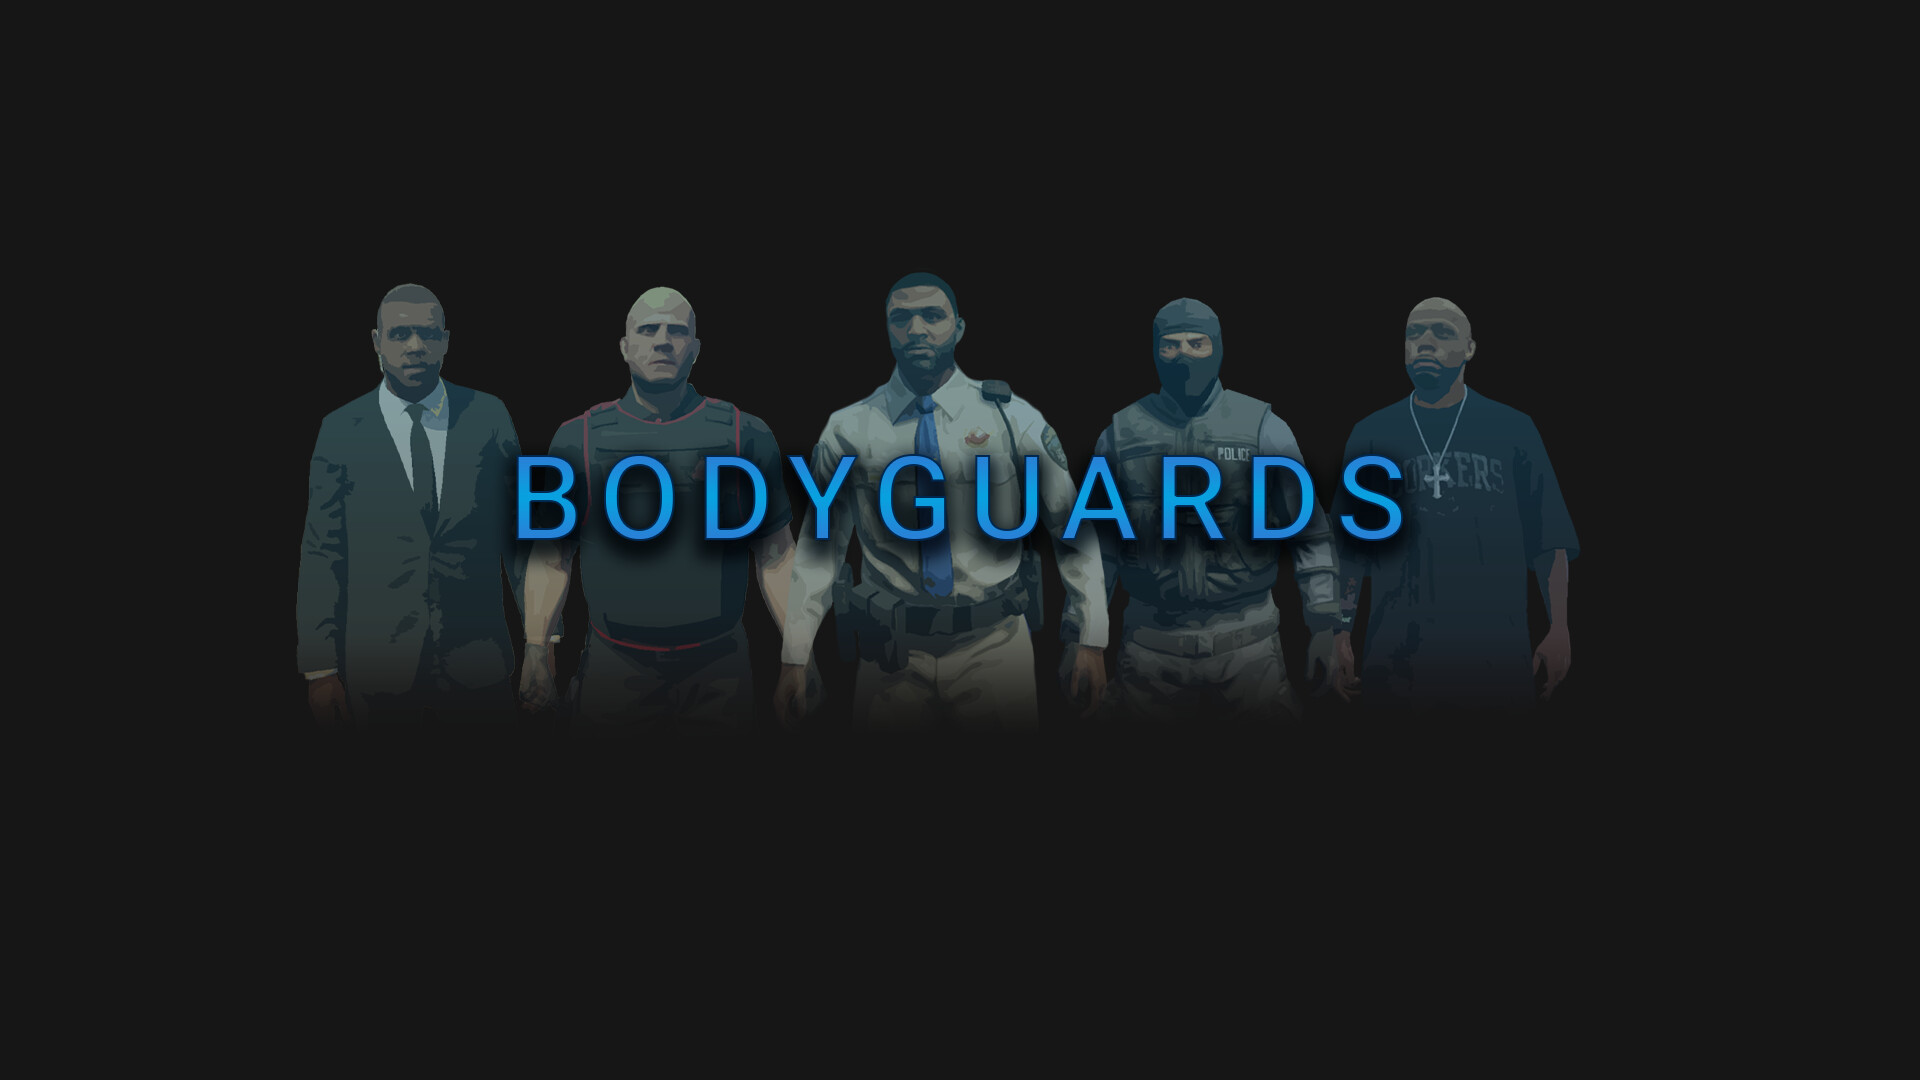 What Are The Different Types of Bodyguards?